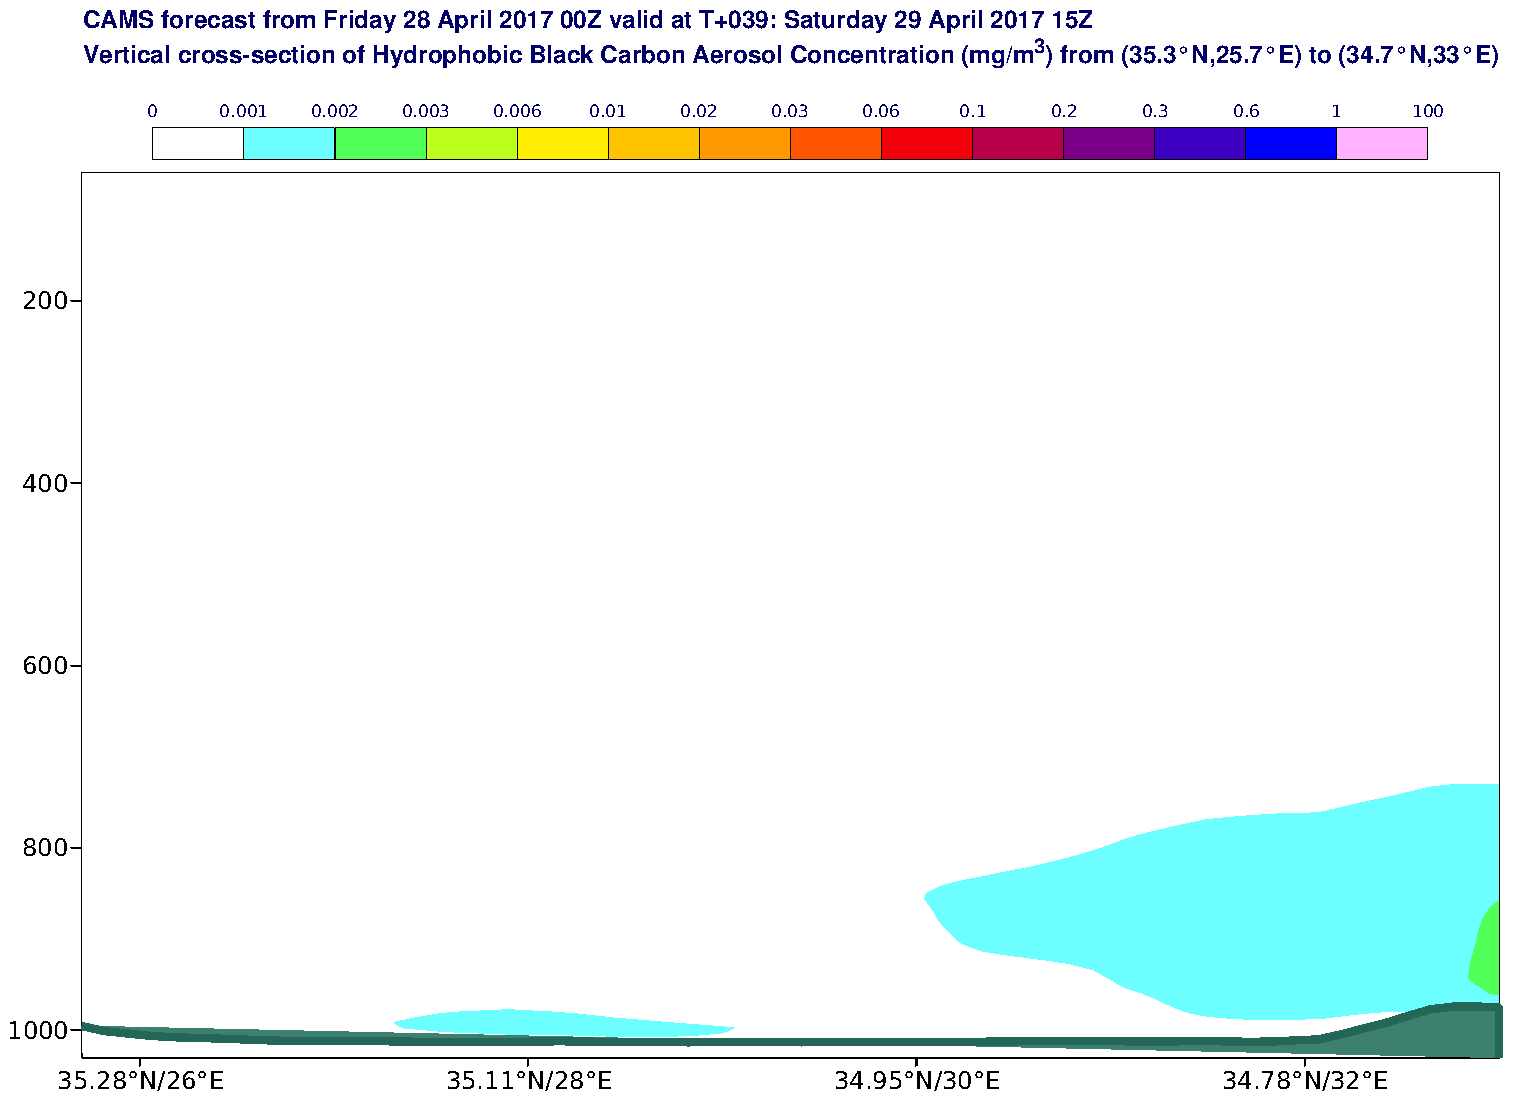 Vertical cross-section of Hydrophobic Black Carbon Aerosol Concentration (mg/m3) valid at T39 - 2017-04-29 15:00